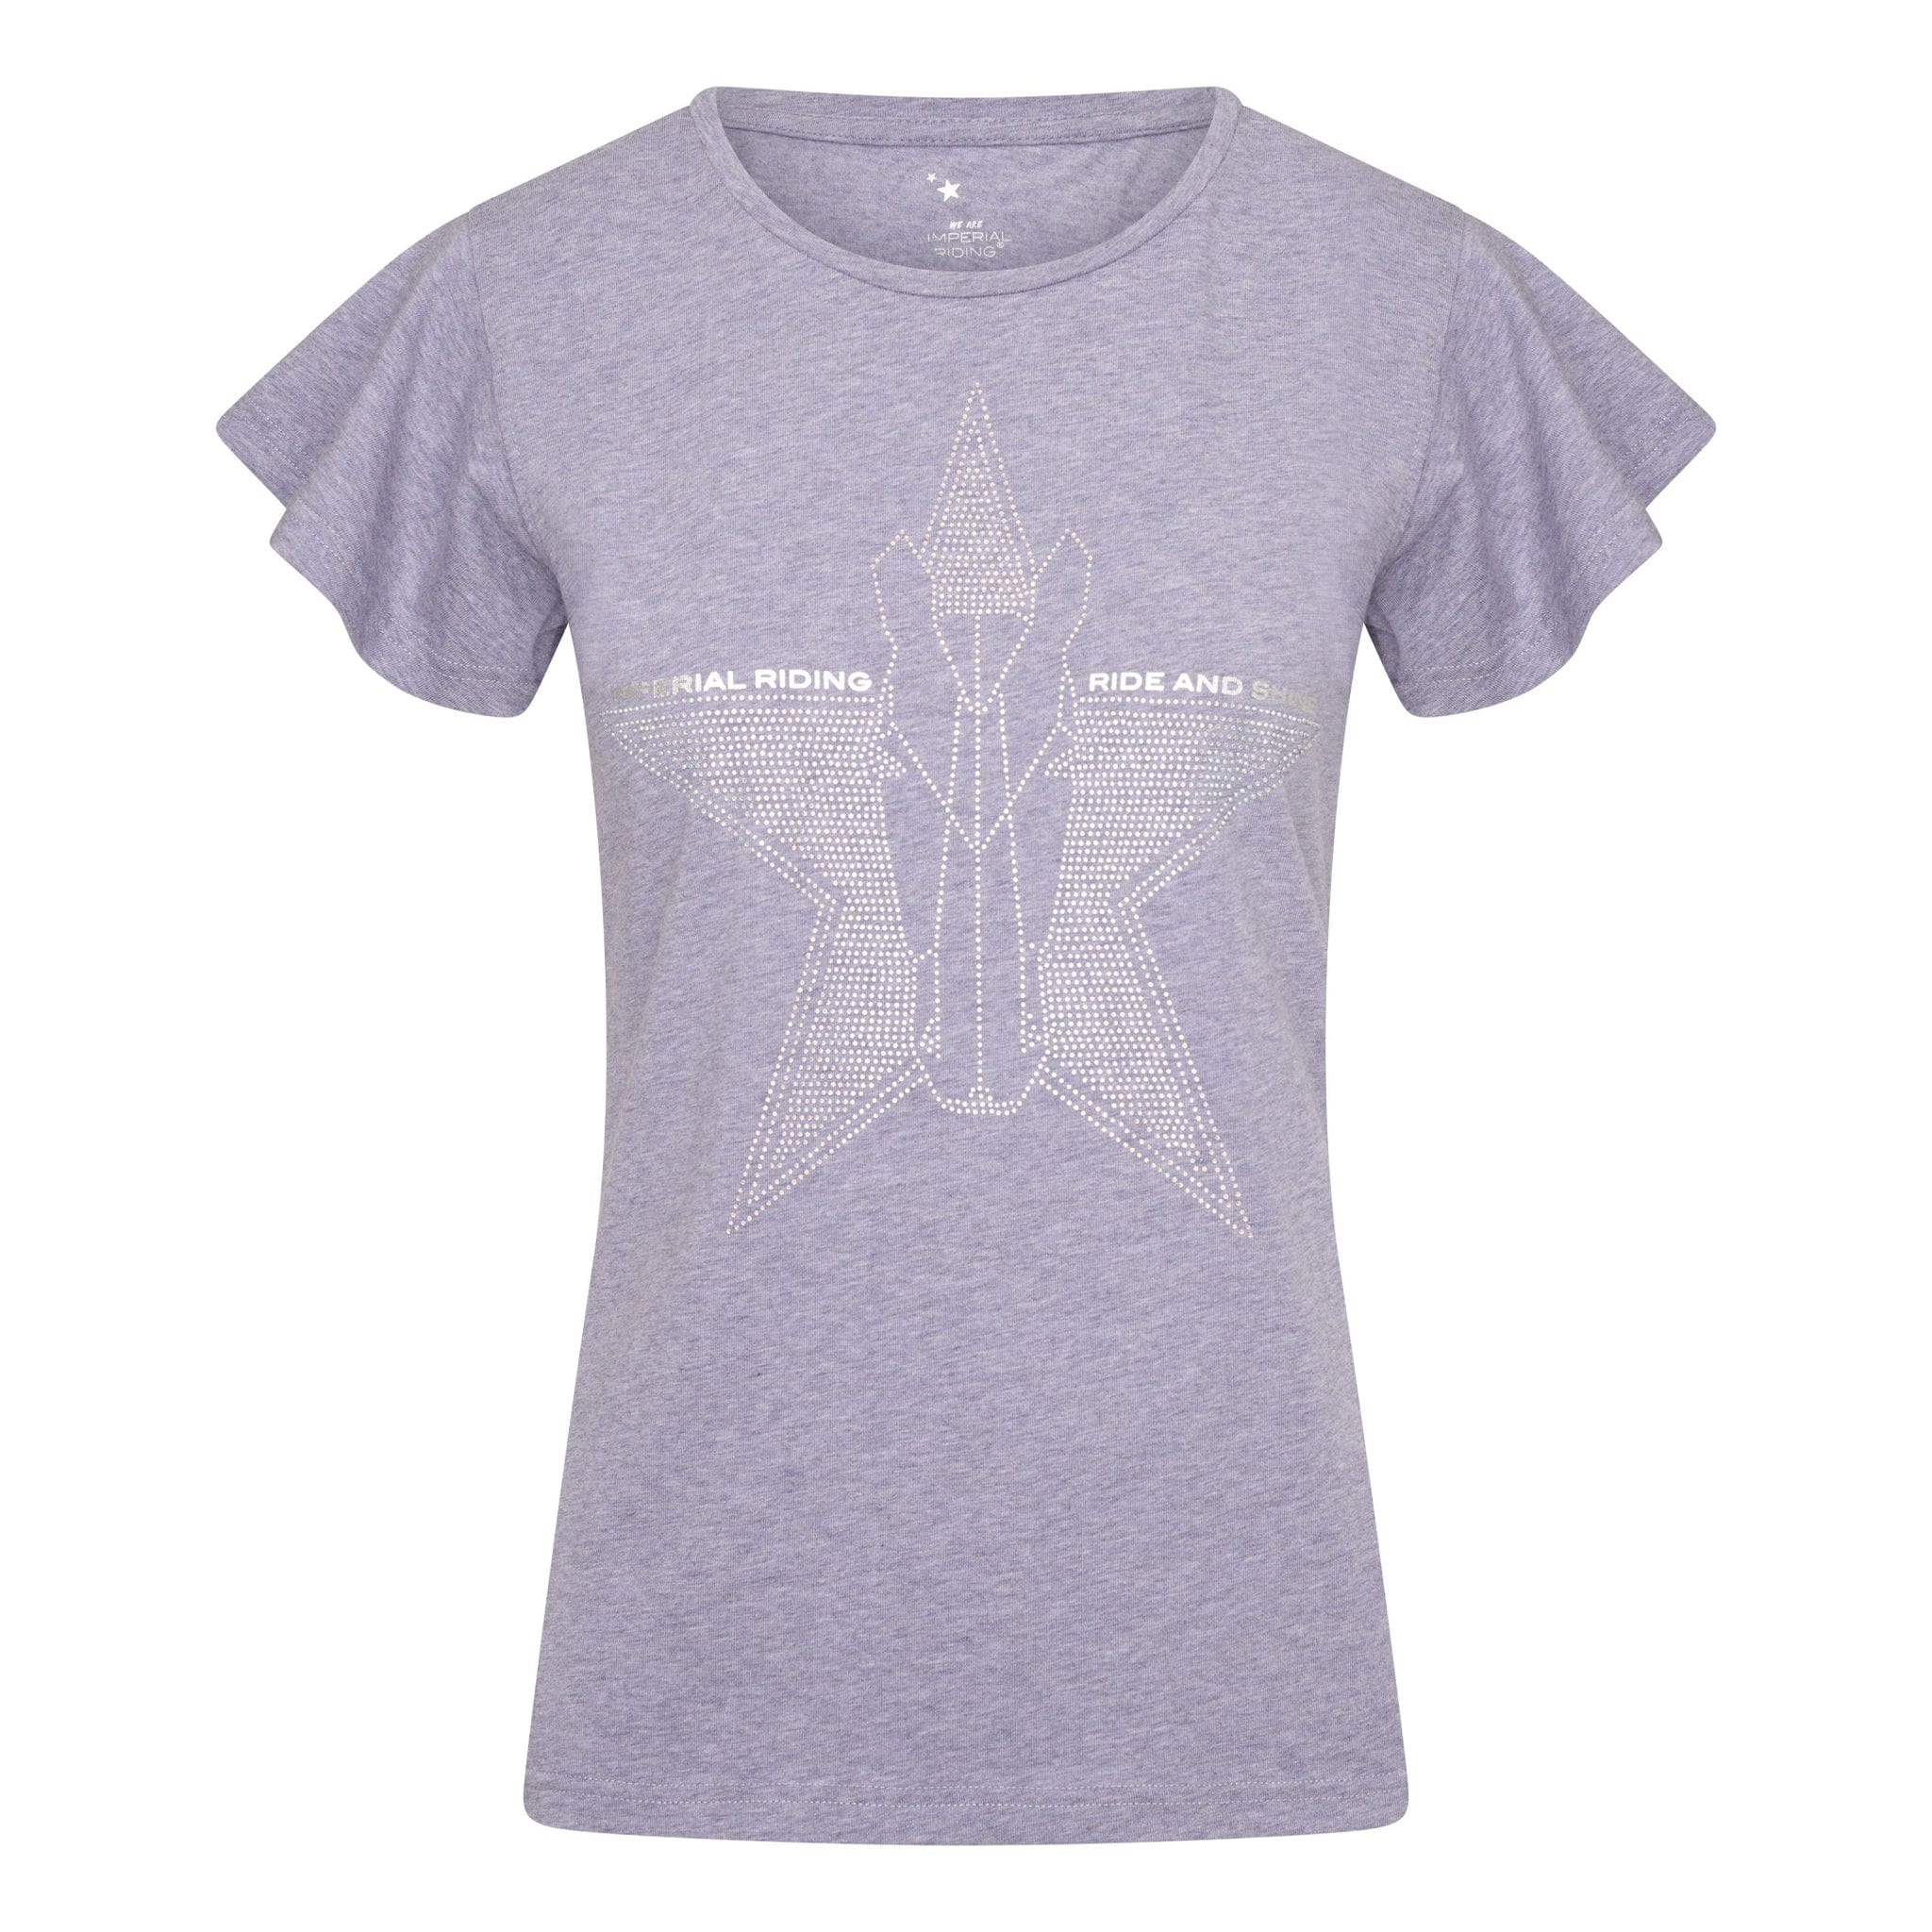 Imperial Riding Belle Star Short Sleeve T-Shirt KL35121006 Grey Heather Front View